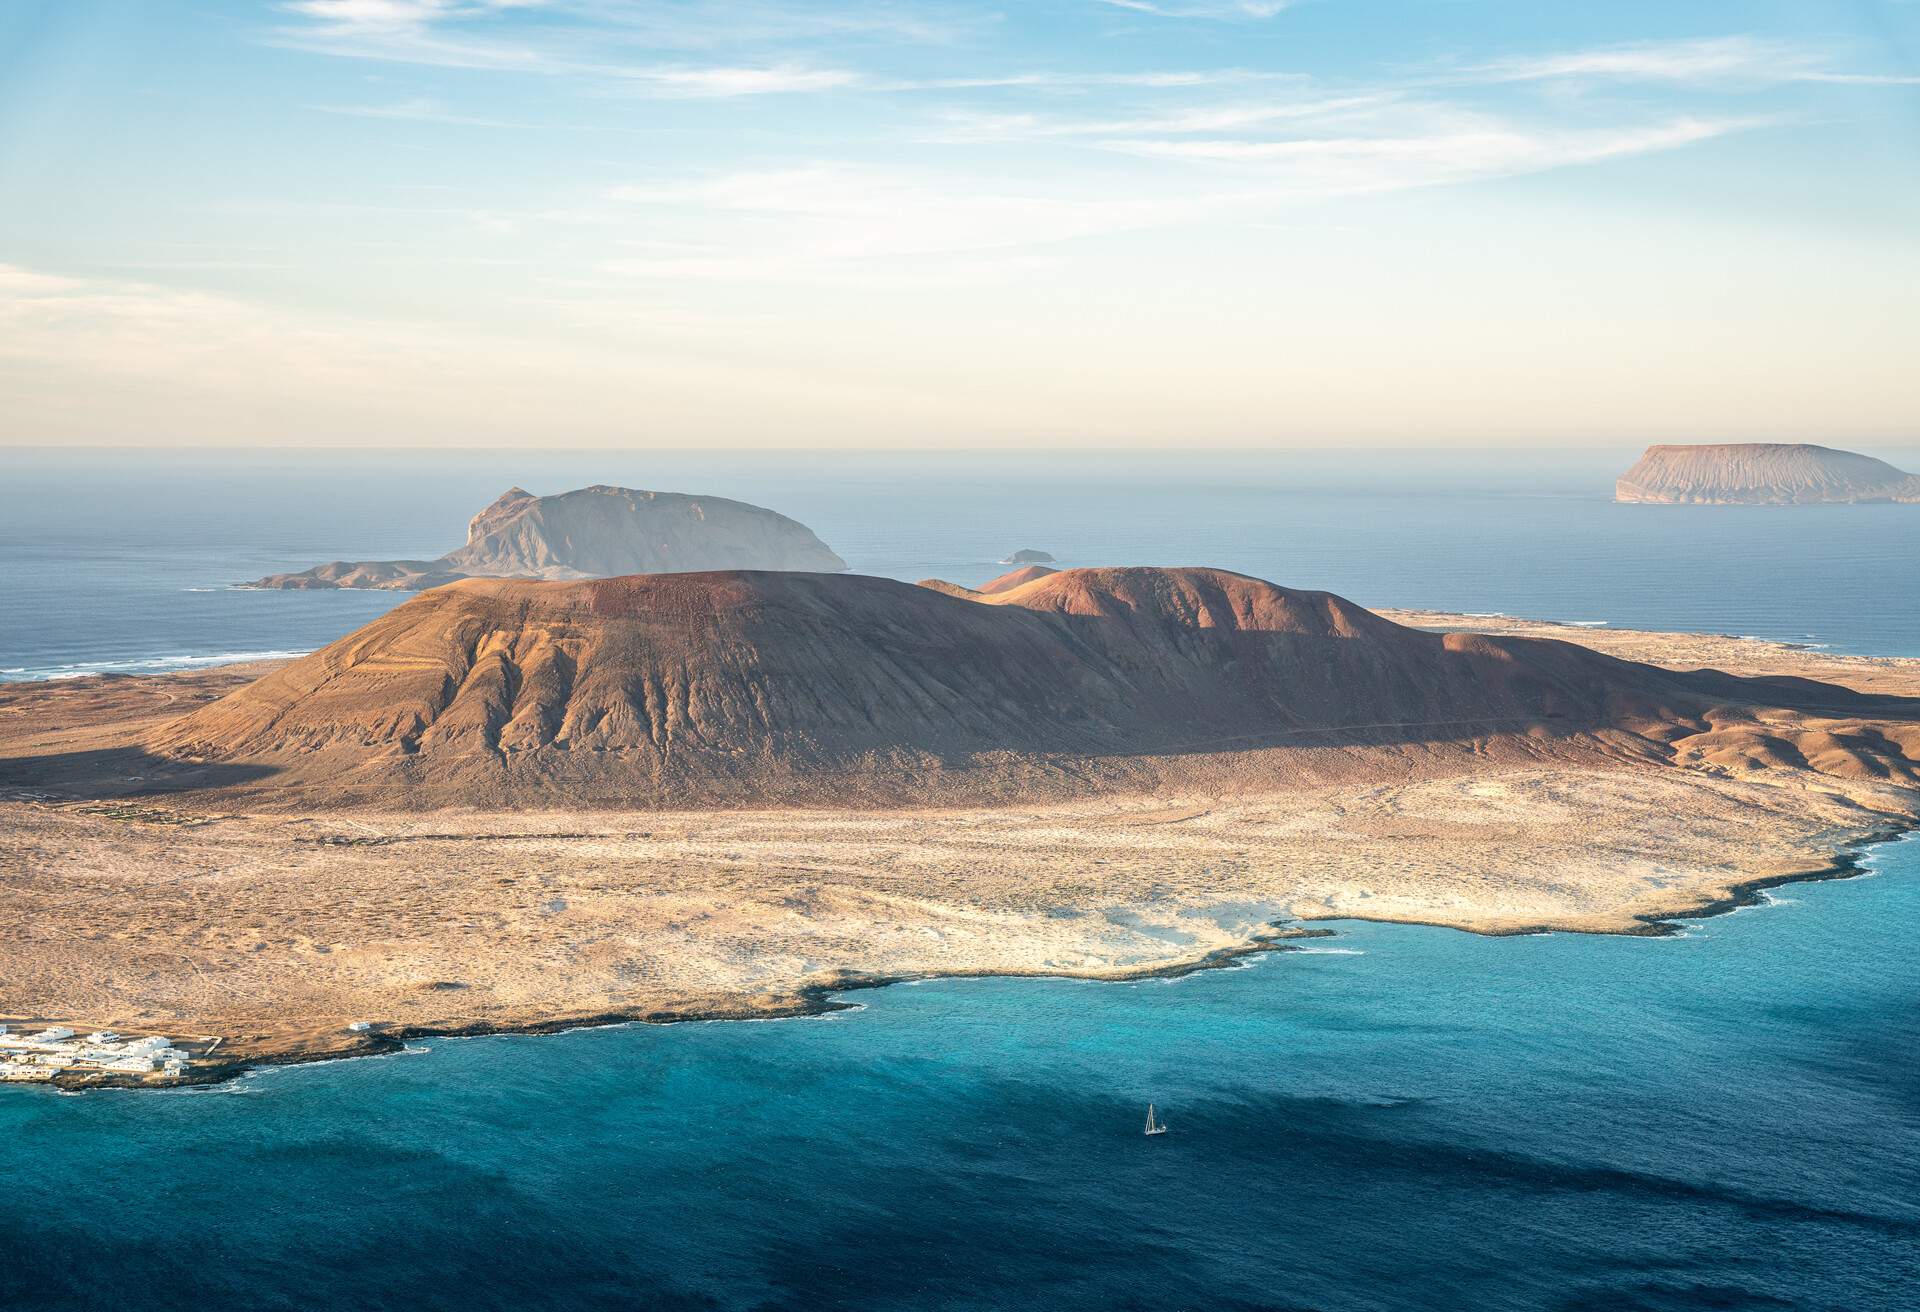 A volcanic island with sandy beaches against deep blue waters of the sea.